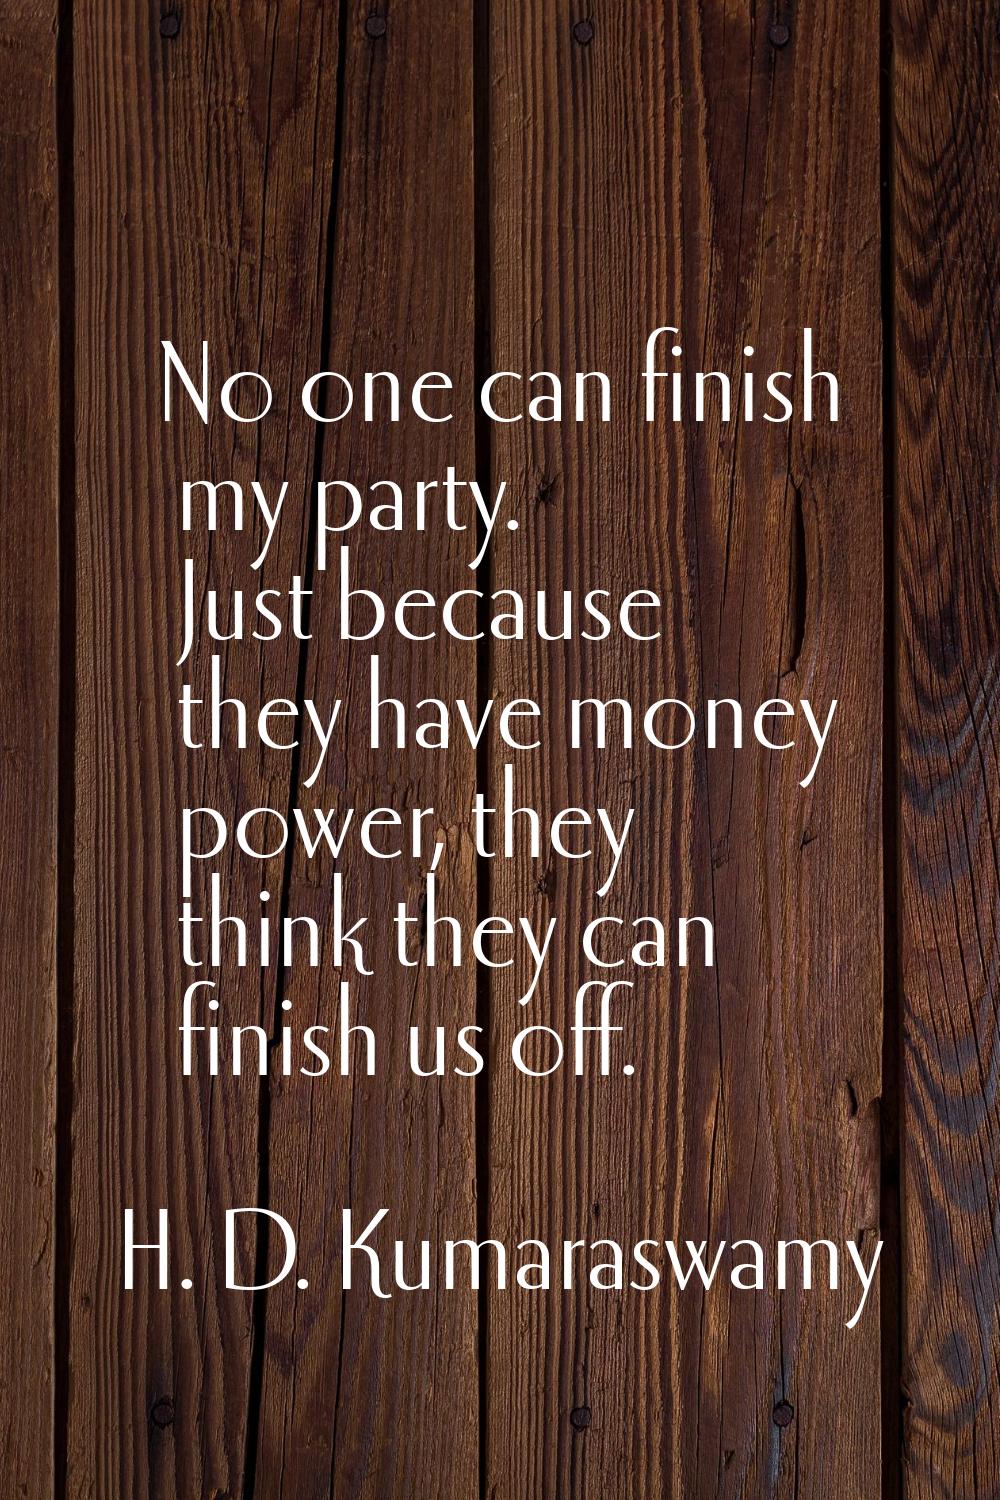 No one can finish my party. Just because they have money power, they think they can finish us off.